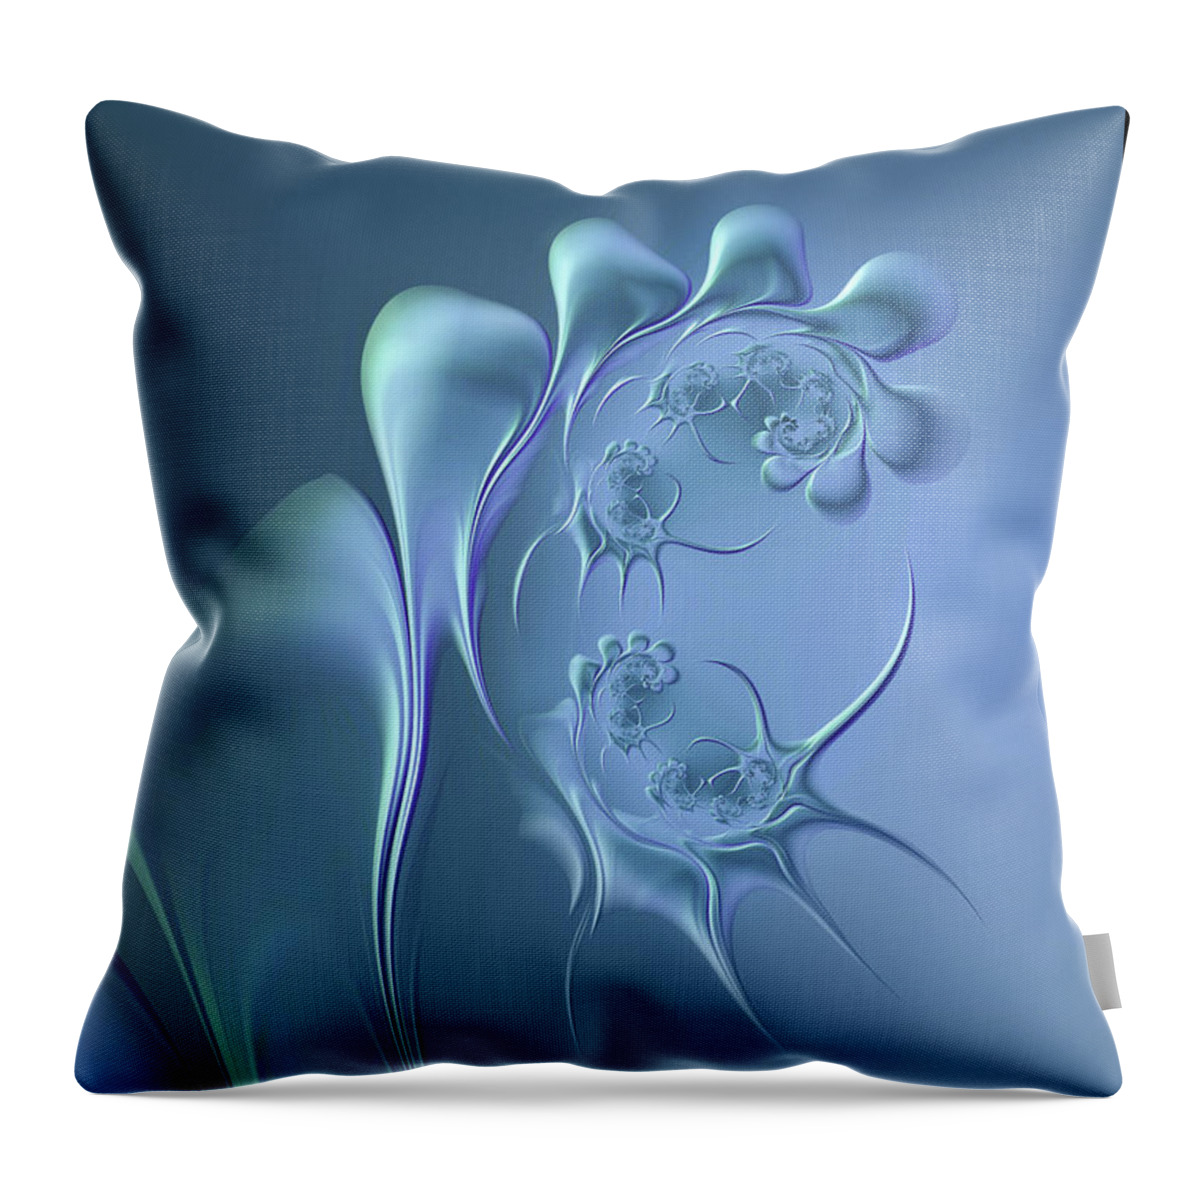 Abstract Throw Pillow featuring the digital art Circle of Life by Manpreet Sokhi